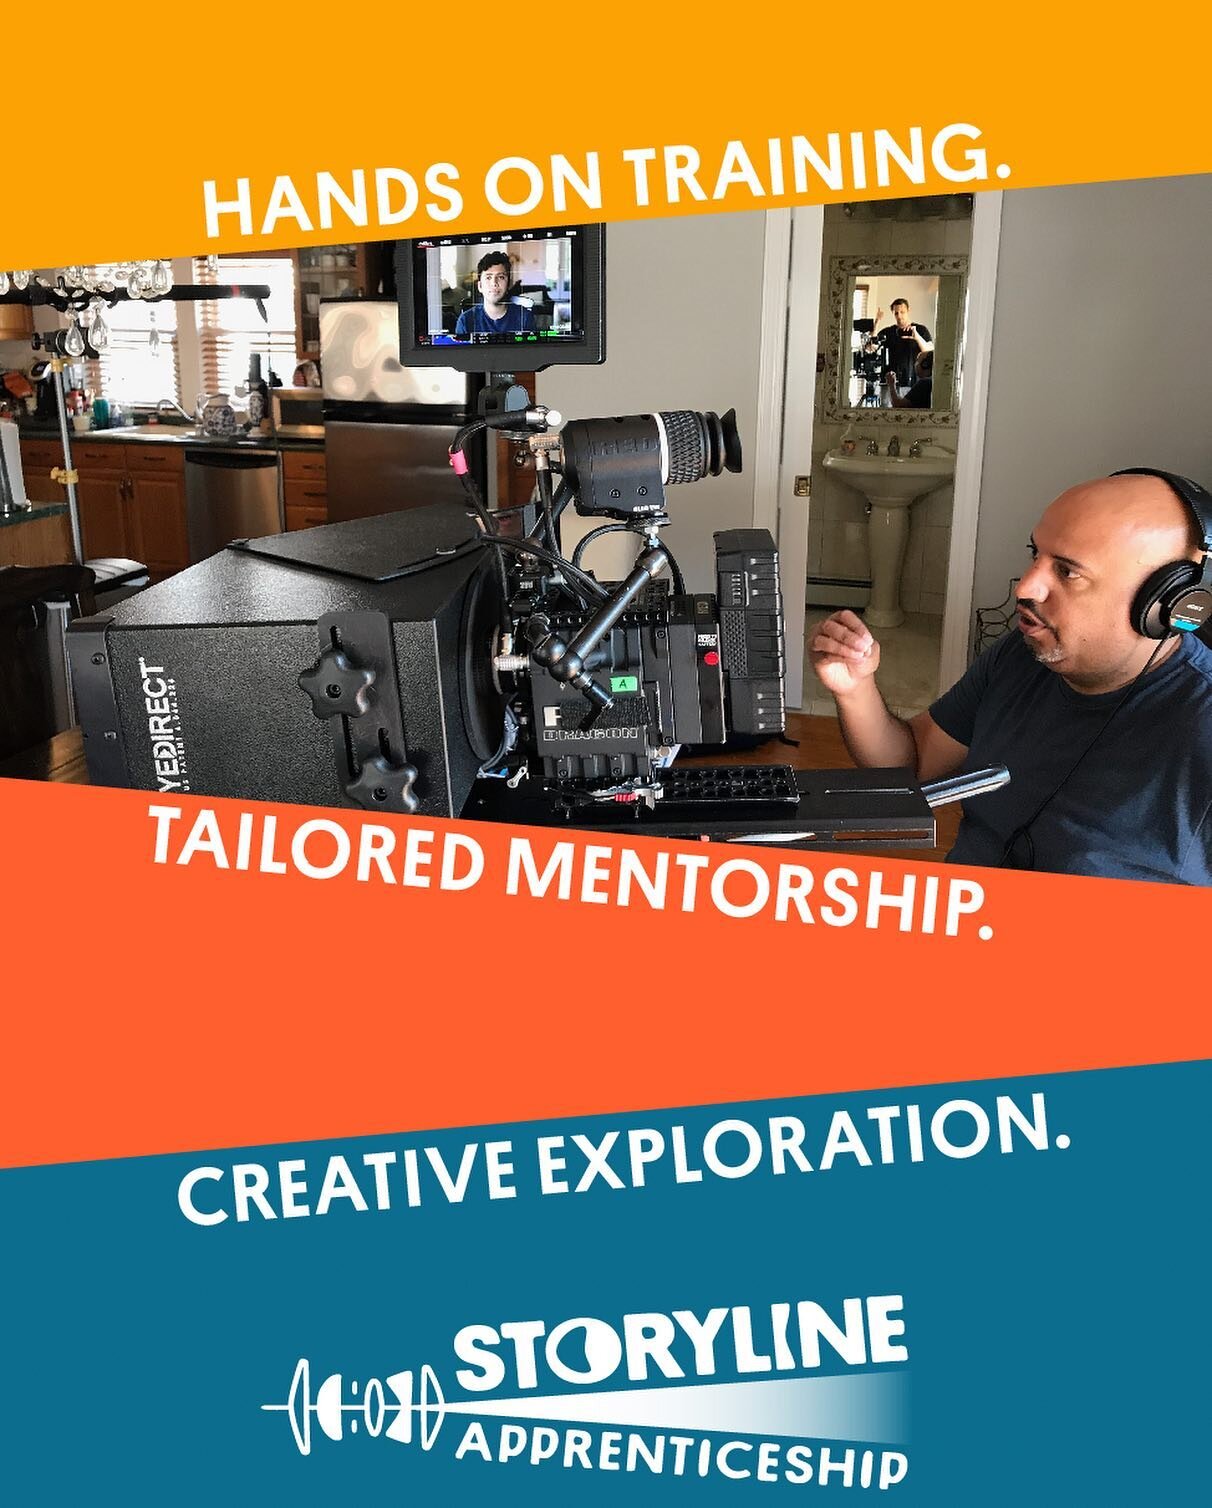 Storyline is launching a first-of-its kind apprenticeship program. This paid, full-time opportunity is a unique professional development and training program to develop career pathways for producers and emerging media makers who self-identify as unde